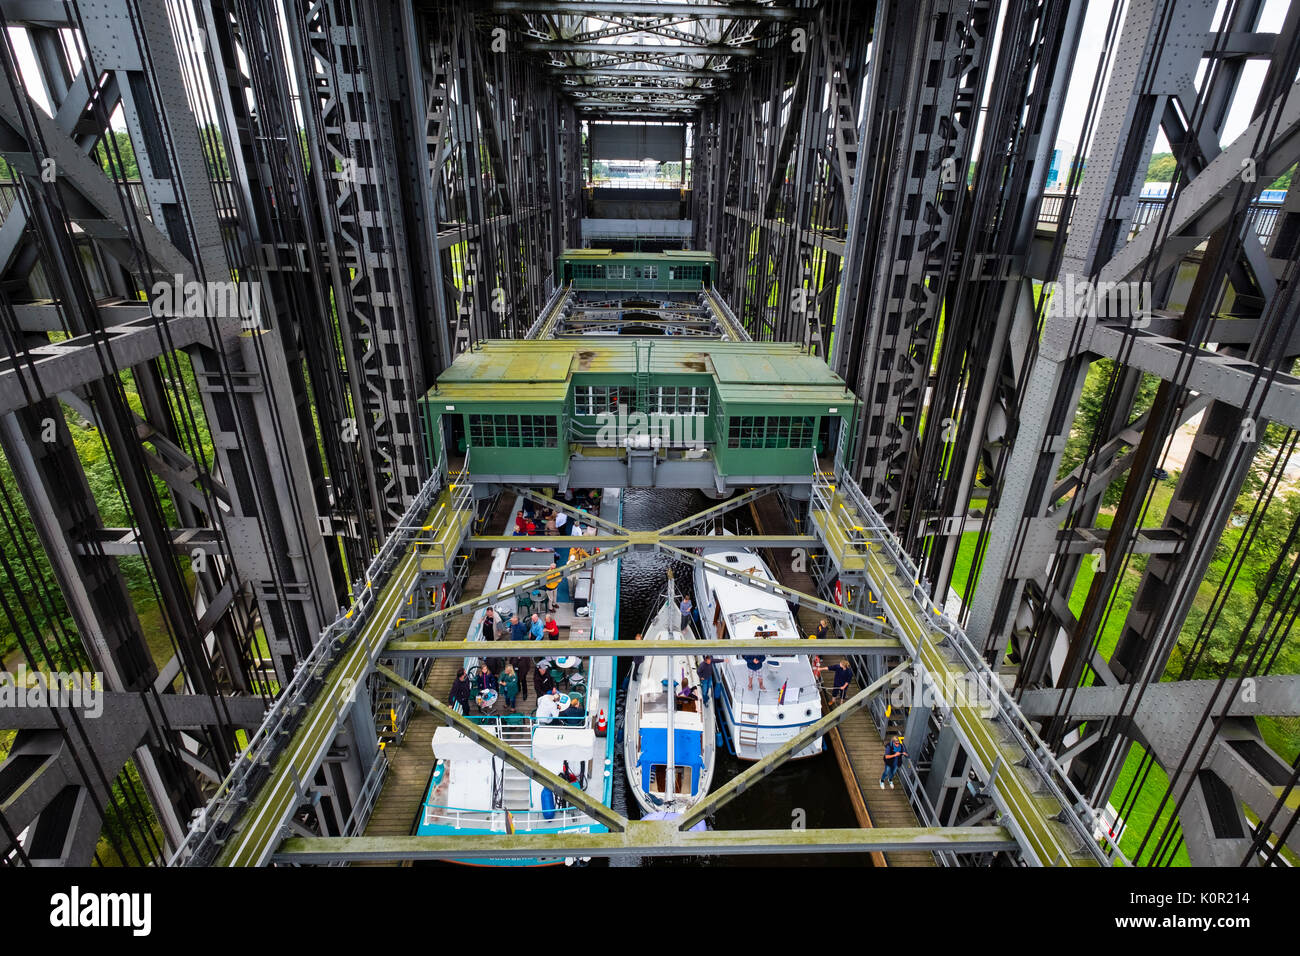 View of boats being raised inside historic ship lift at Niederfinow in Brandenburg, Germany Stock Photo